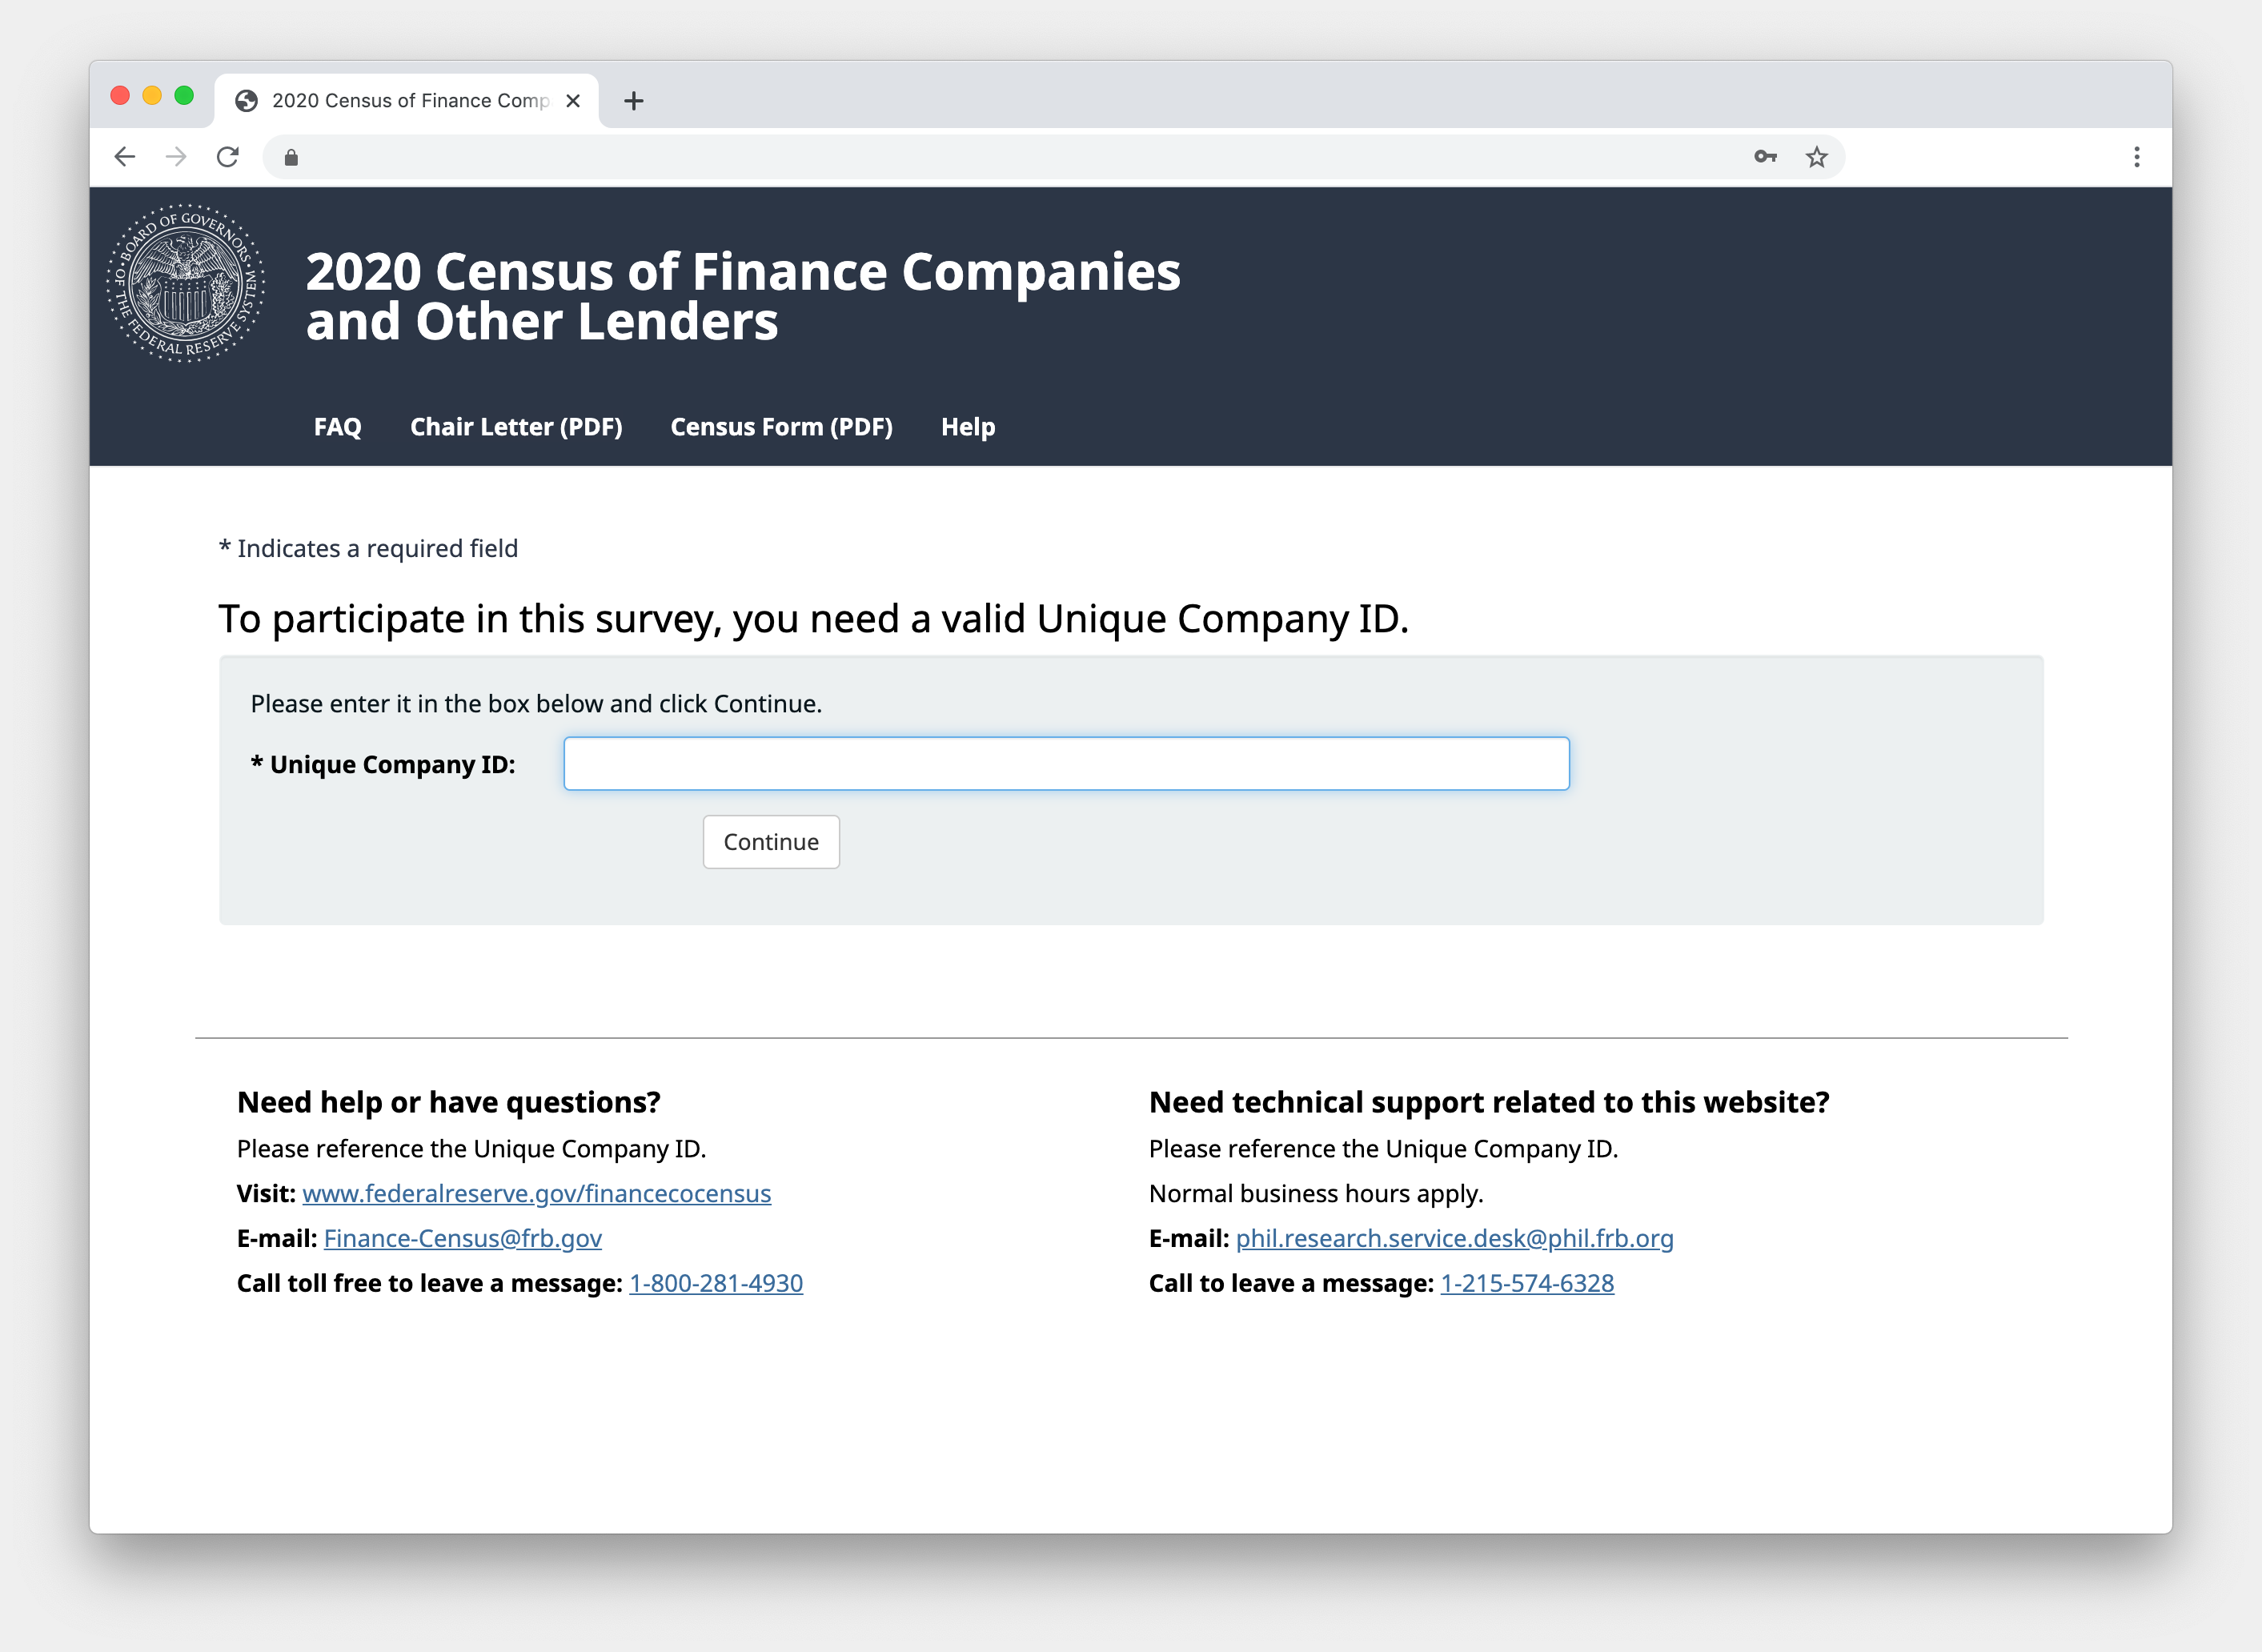 The landing or log-in page for the Survey of Finance Companies.